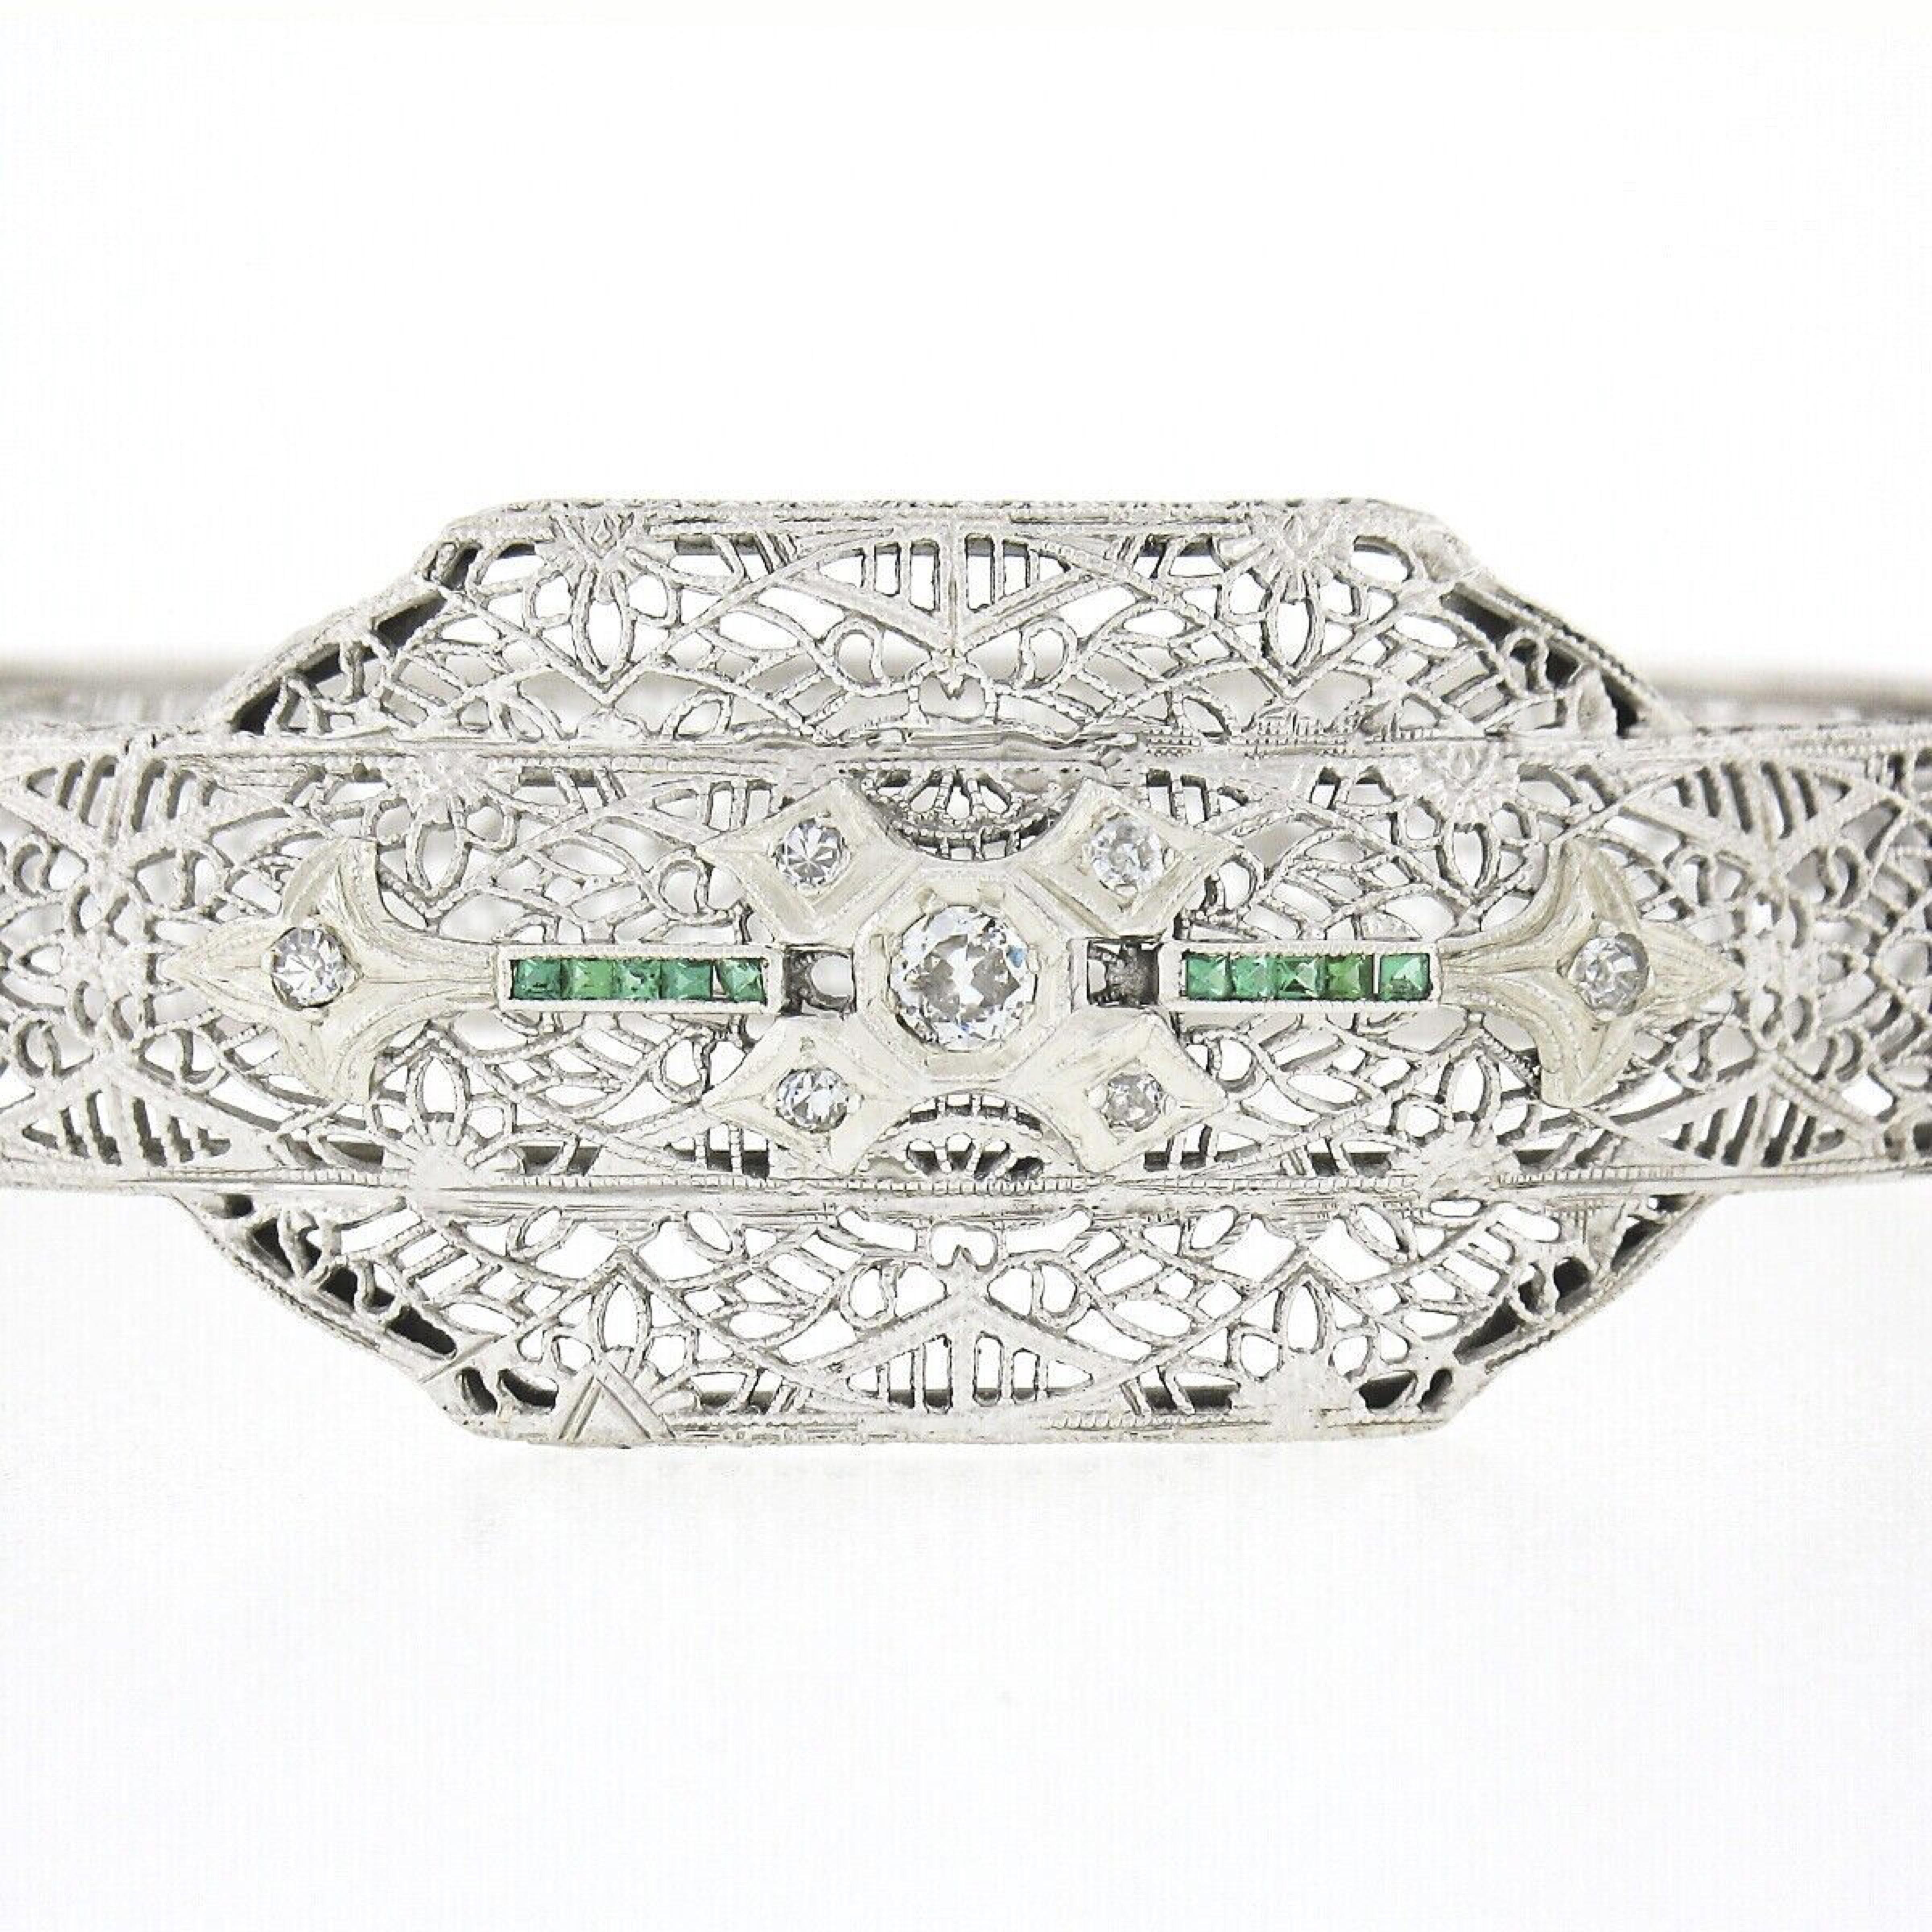 Here we have a magnificent antique bangle bracelet crafted from solid 14k white gold with a platinum top during the art deco period. This rare bangle style bracelet is completely covered with outstanding open filigree work and etched floral designs